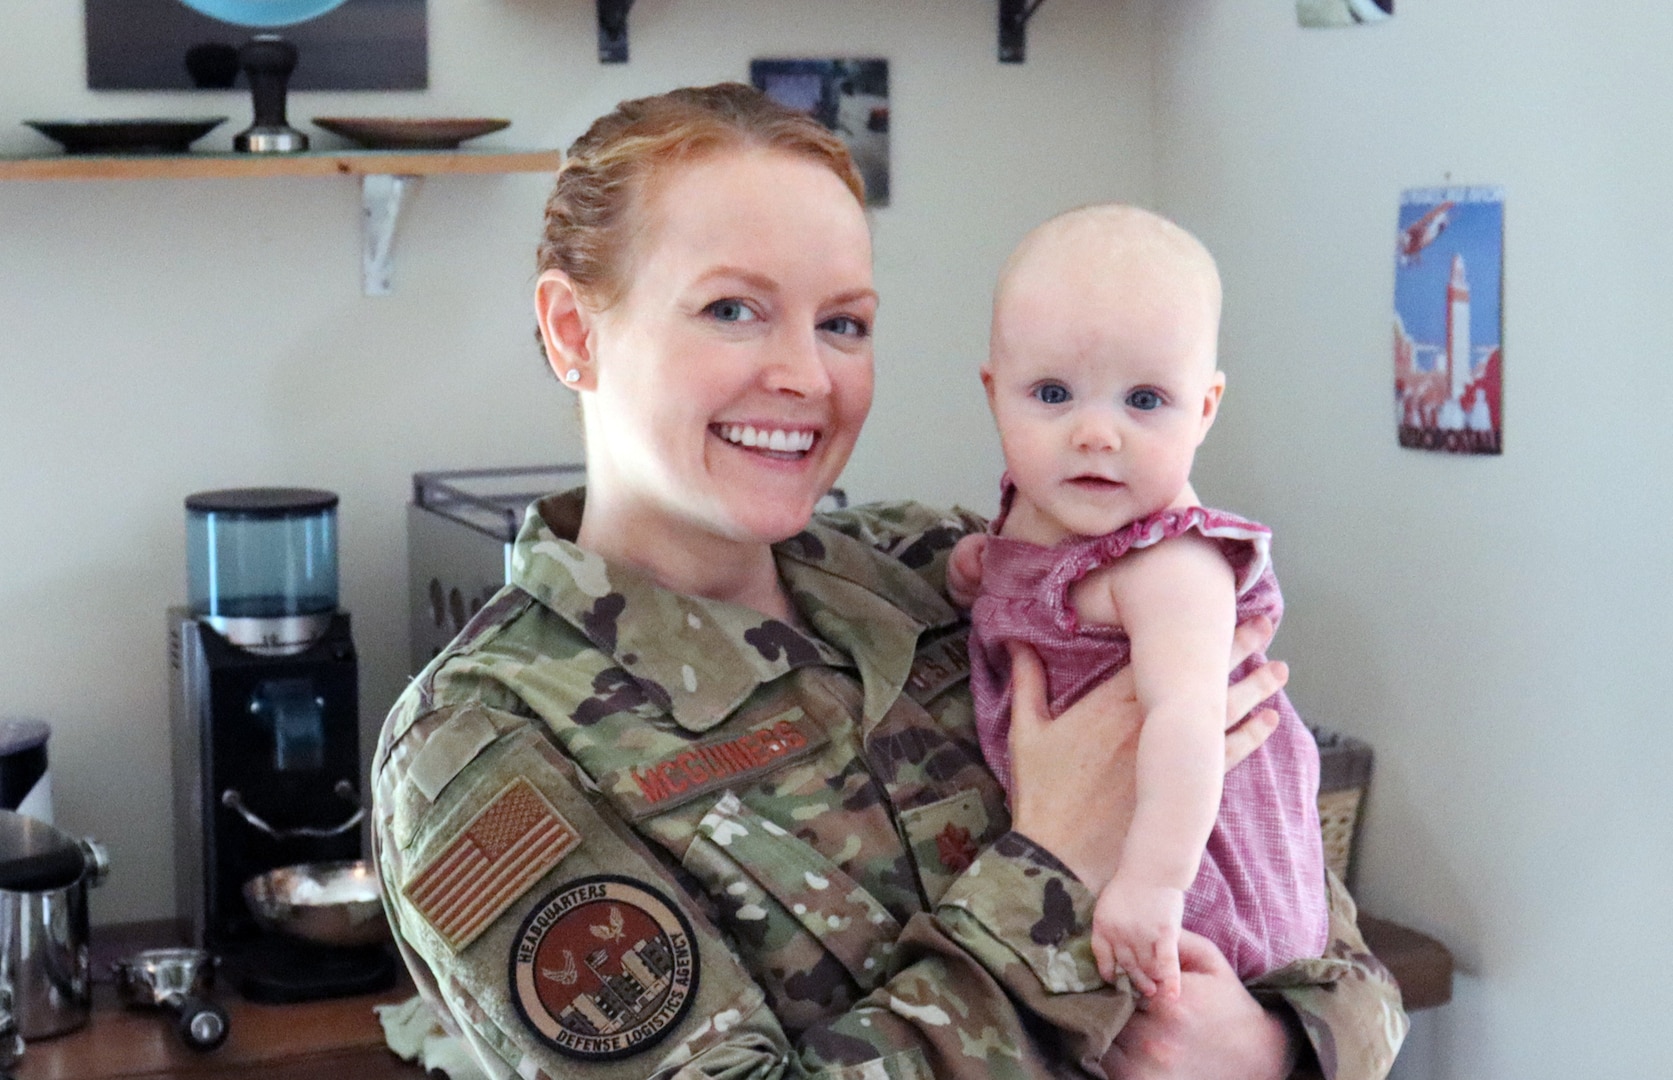 Woman in Air Force camo uniform holds her baby daughter.